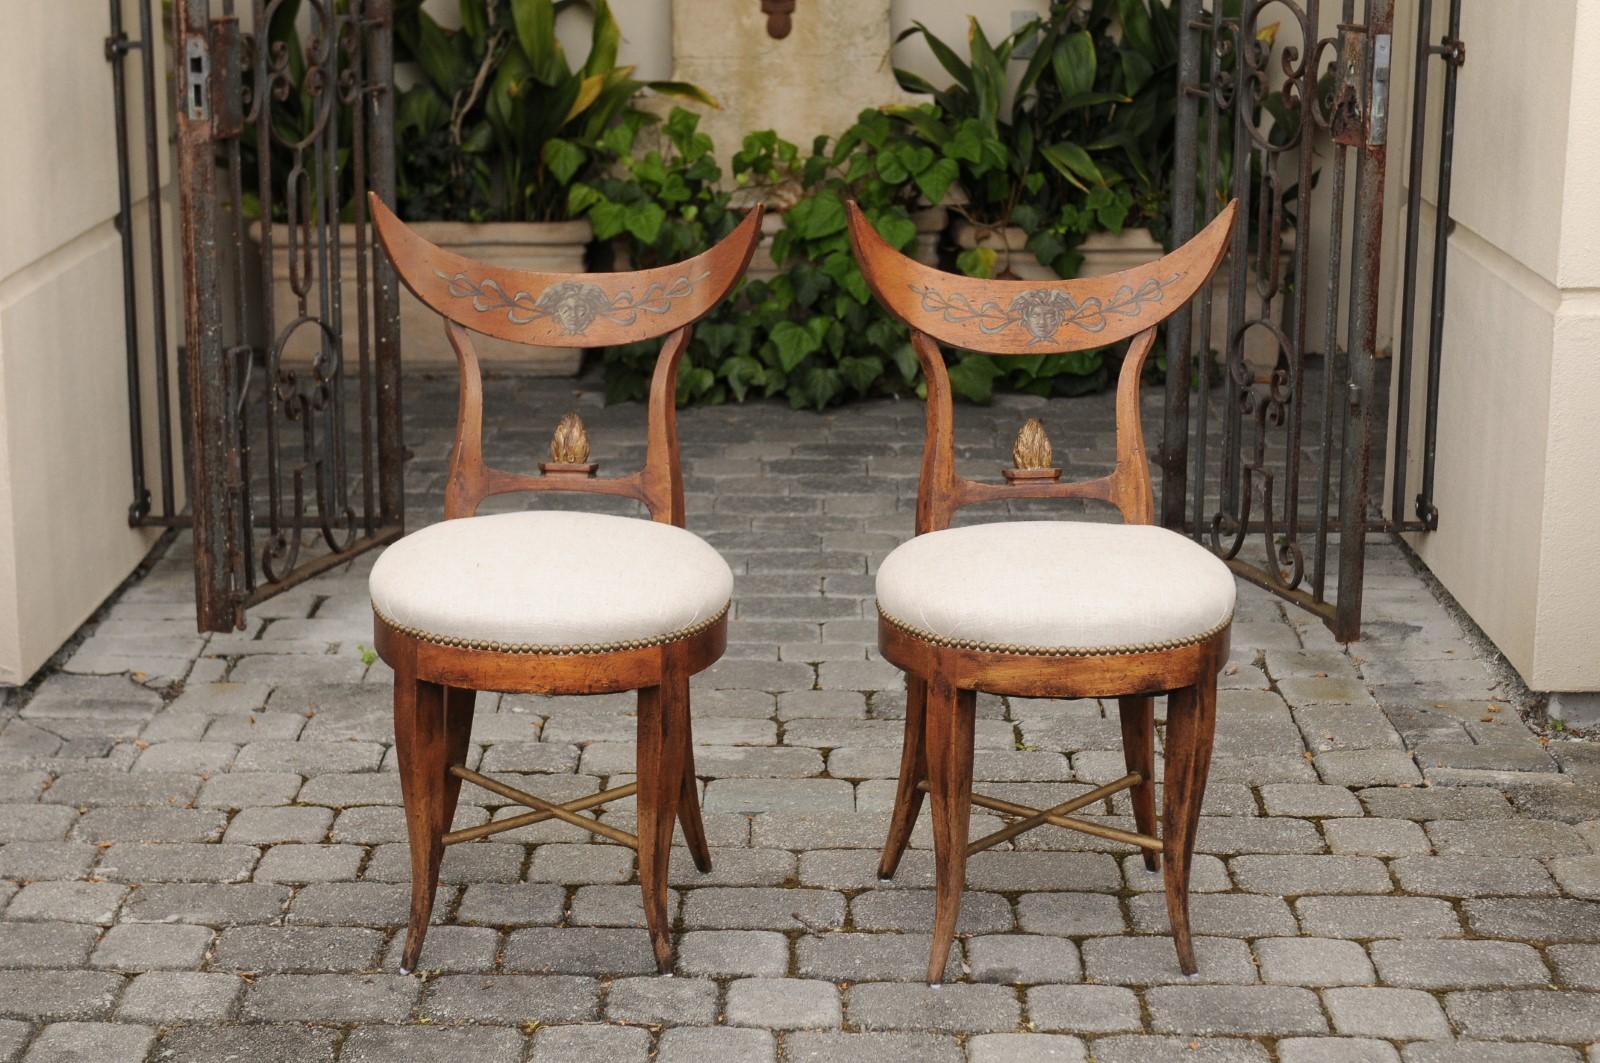 Pair of Italian 1860s Upholstered Side Chairs with Crescent Backs and Saber Legs For Sale 1